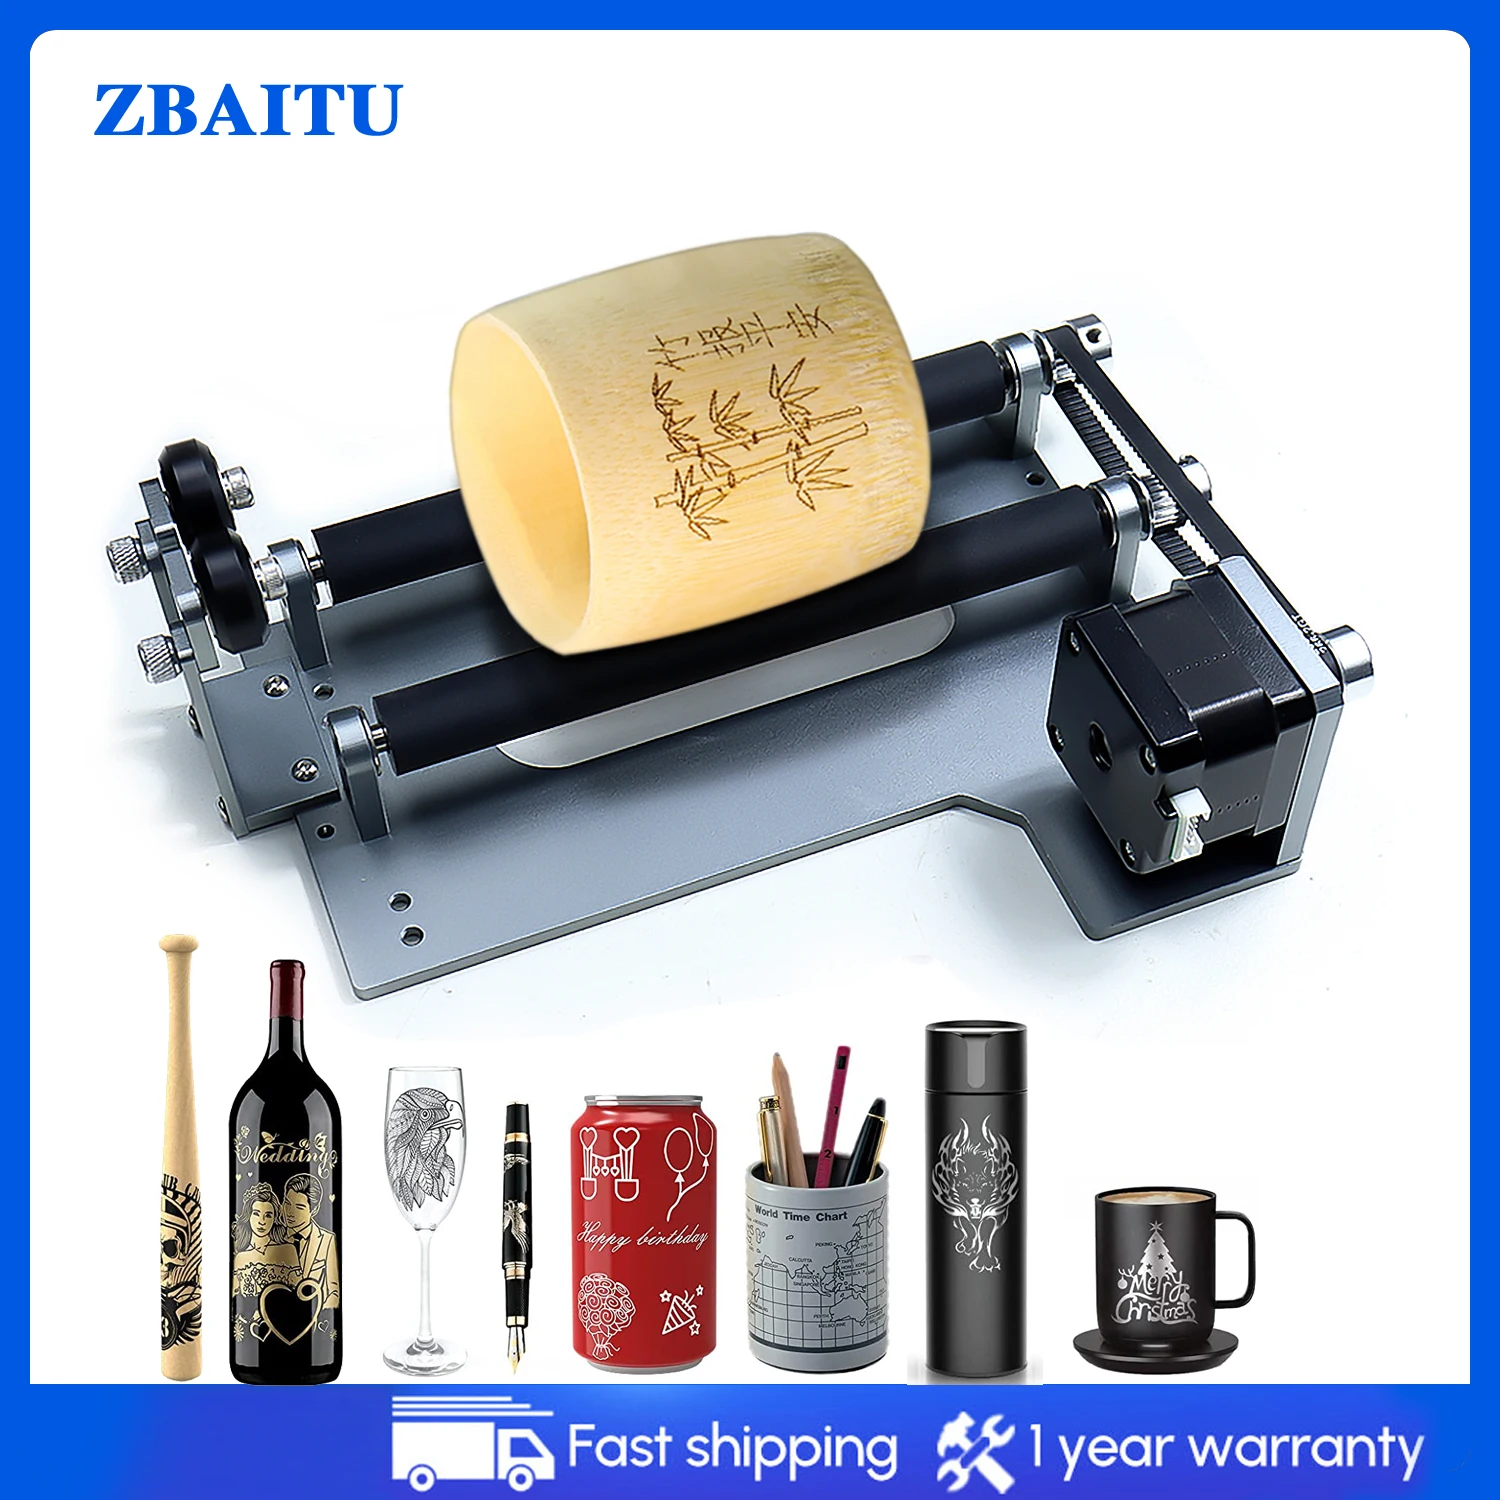 ZBAITU R10 Rotary Roller for Laser Engraver Woodworking Machines Y-axis 360° Rotating Engraving Cylindrical Objects Wine Glass